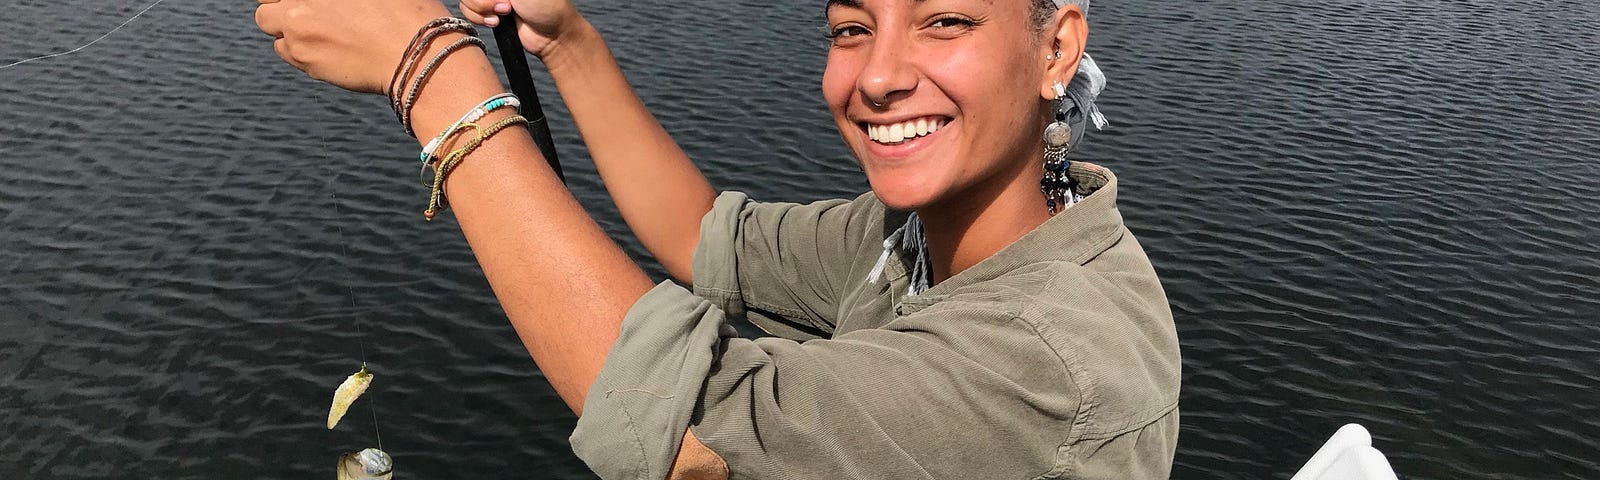 Young person of color smiling, sitting on a dock holding a fishing line with a fish she caught on the hook